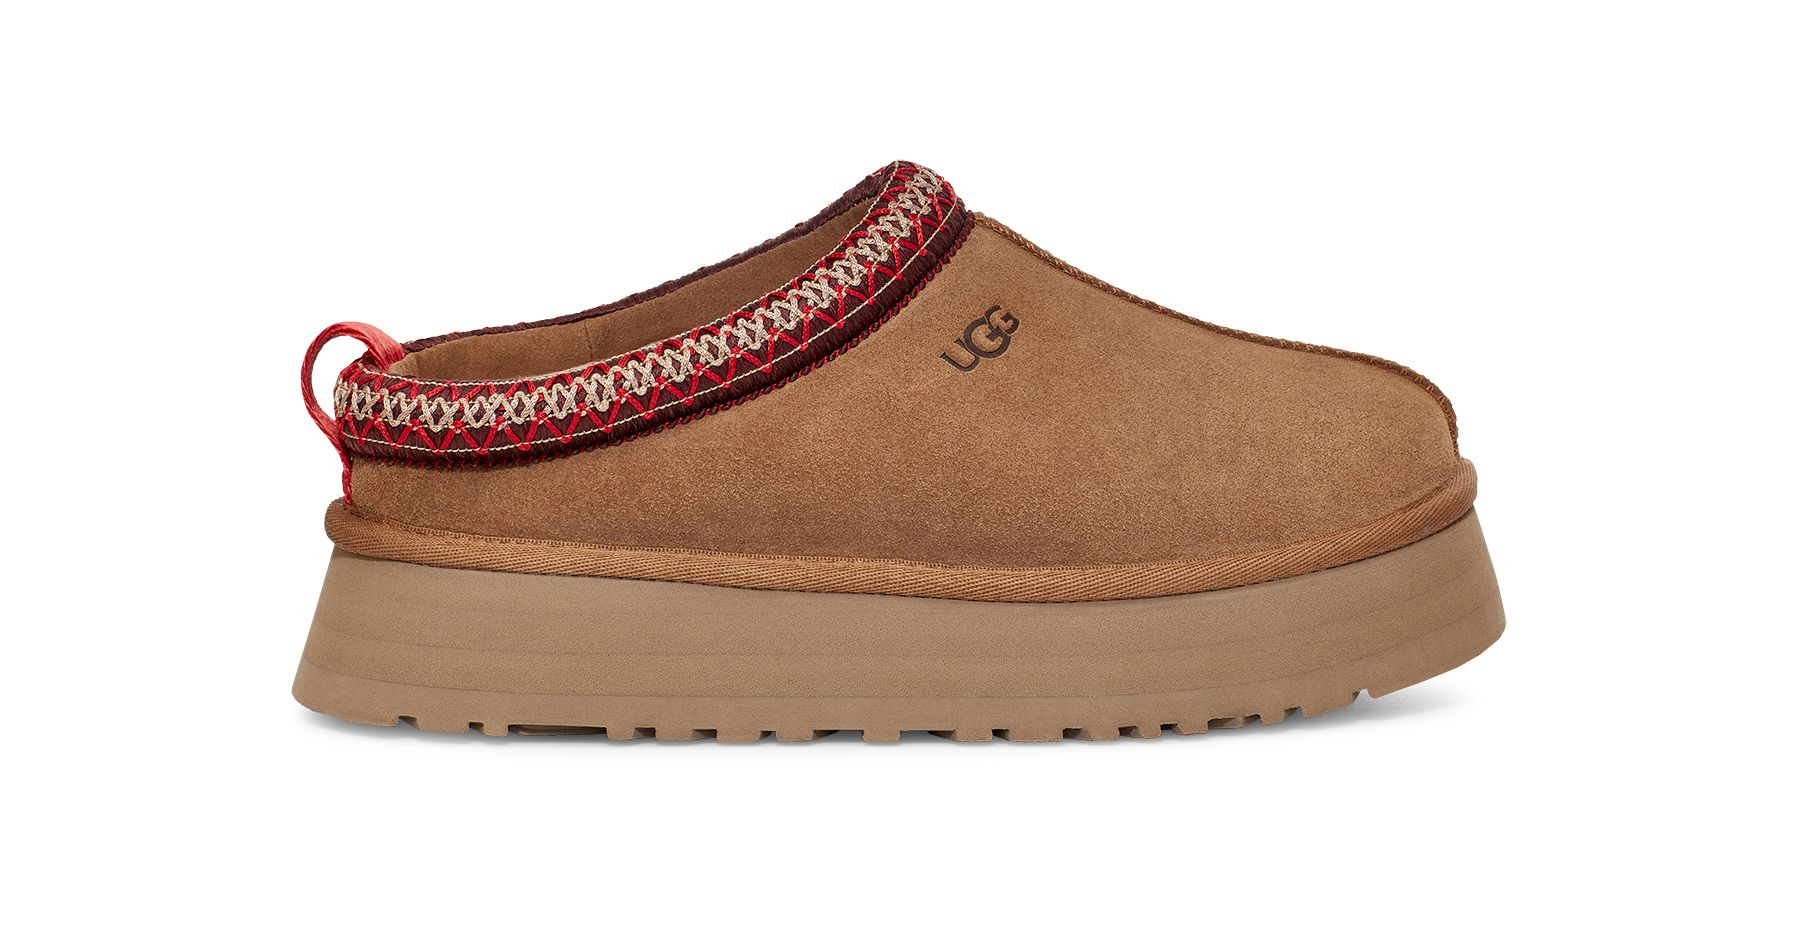 UGG Women's Tazz Suede Slippers in Chestnut, Size 11 | UGG (US)